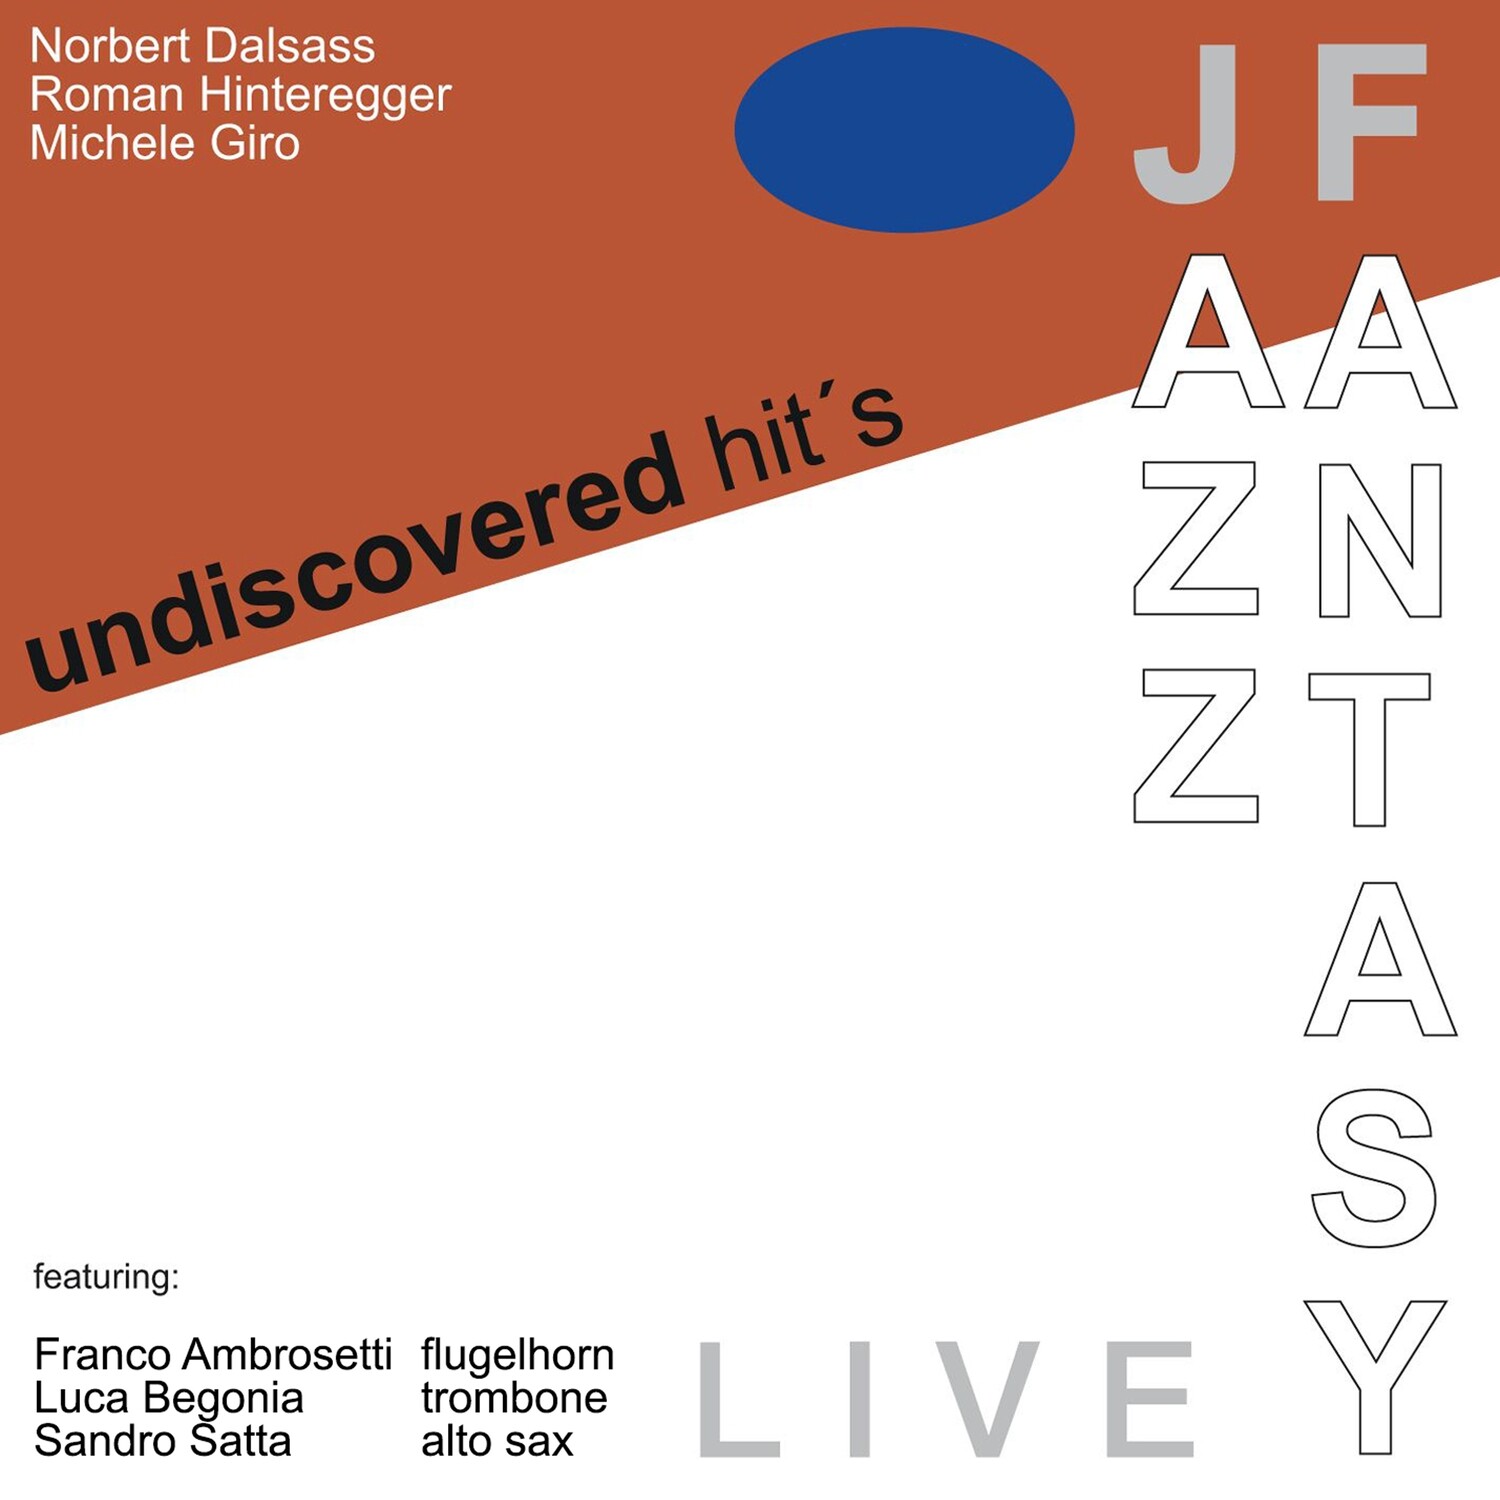 JAZZ FANTASY «Undiscovered Hit’s» (files .wav + covers .jpeg + booklet .pdf)